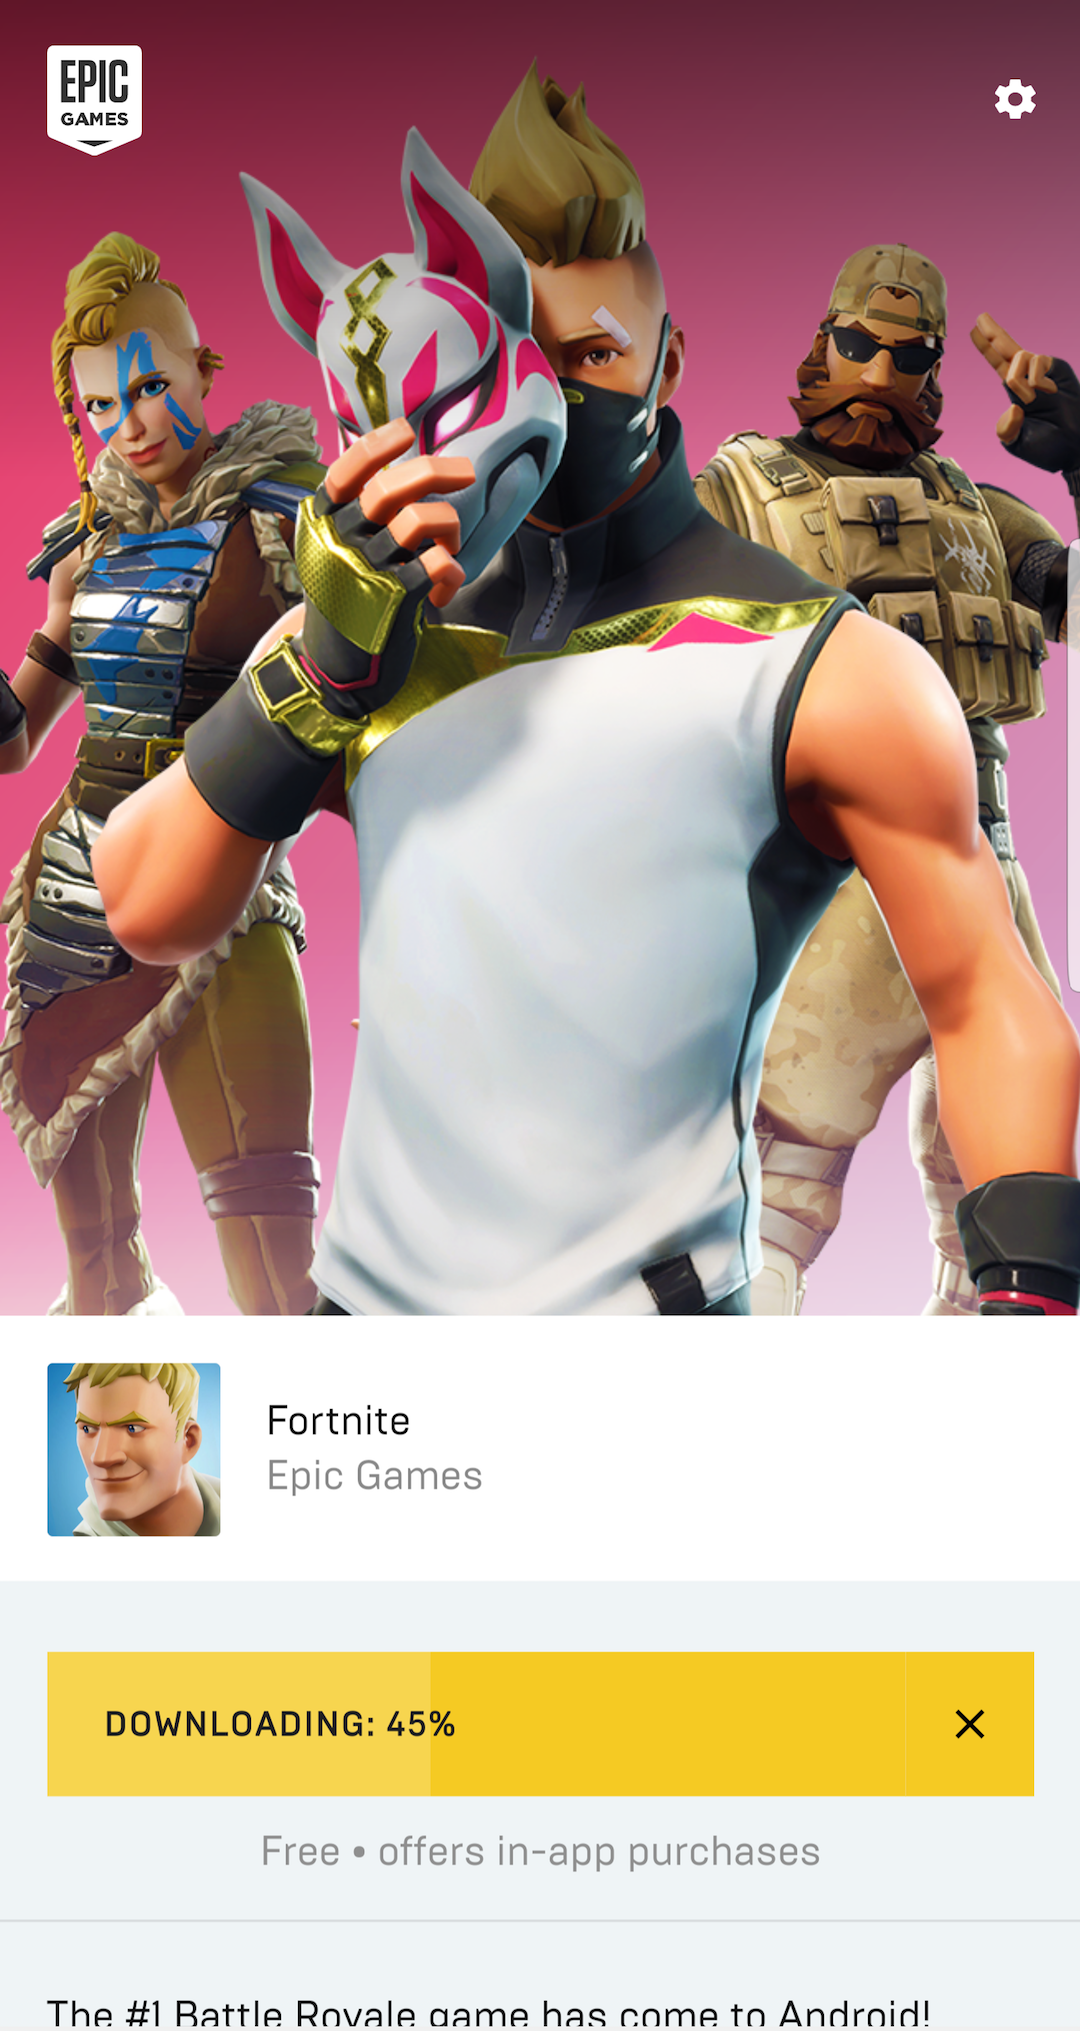 Fortnite for Android Released, But Make Sure You Don't Download